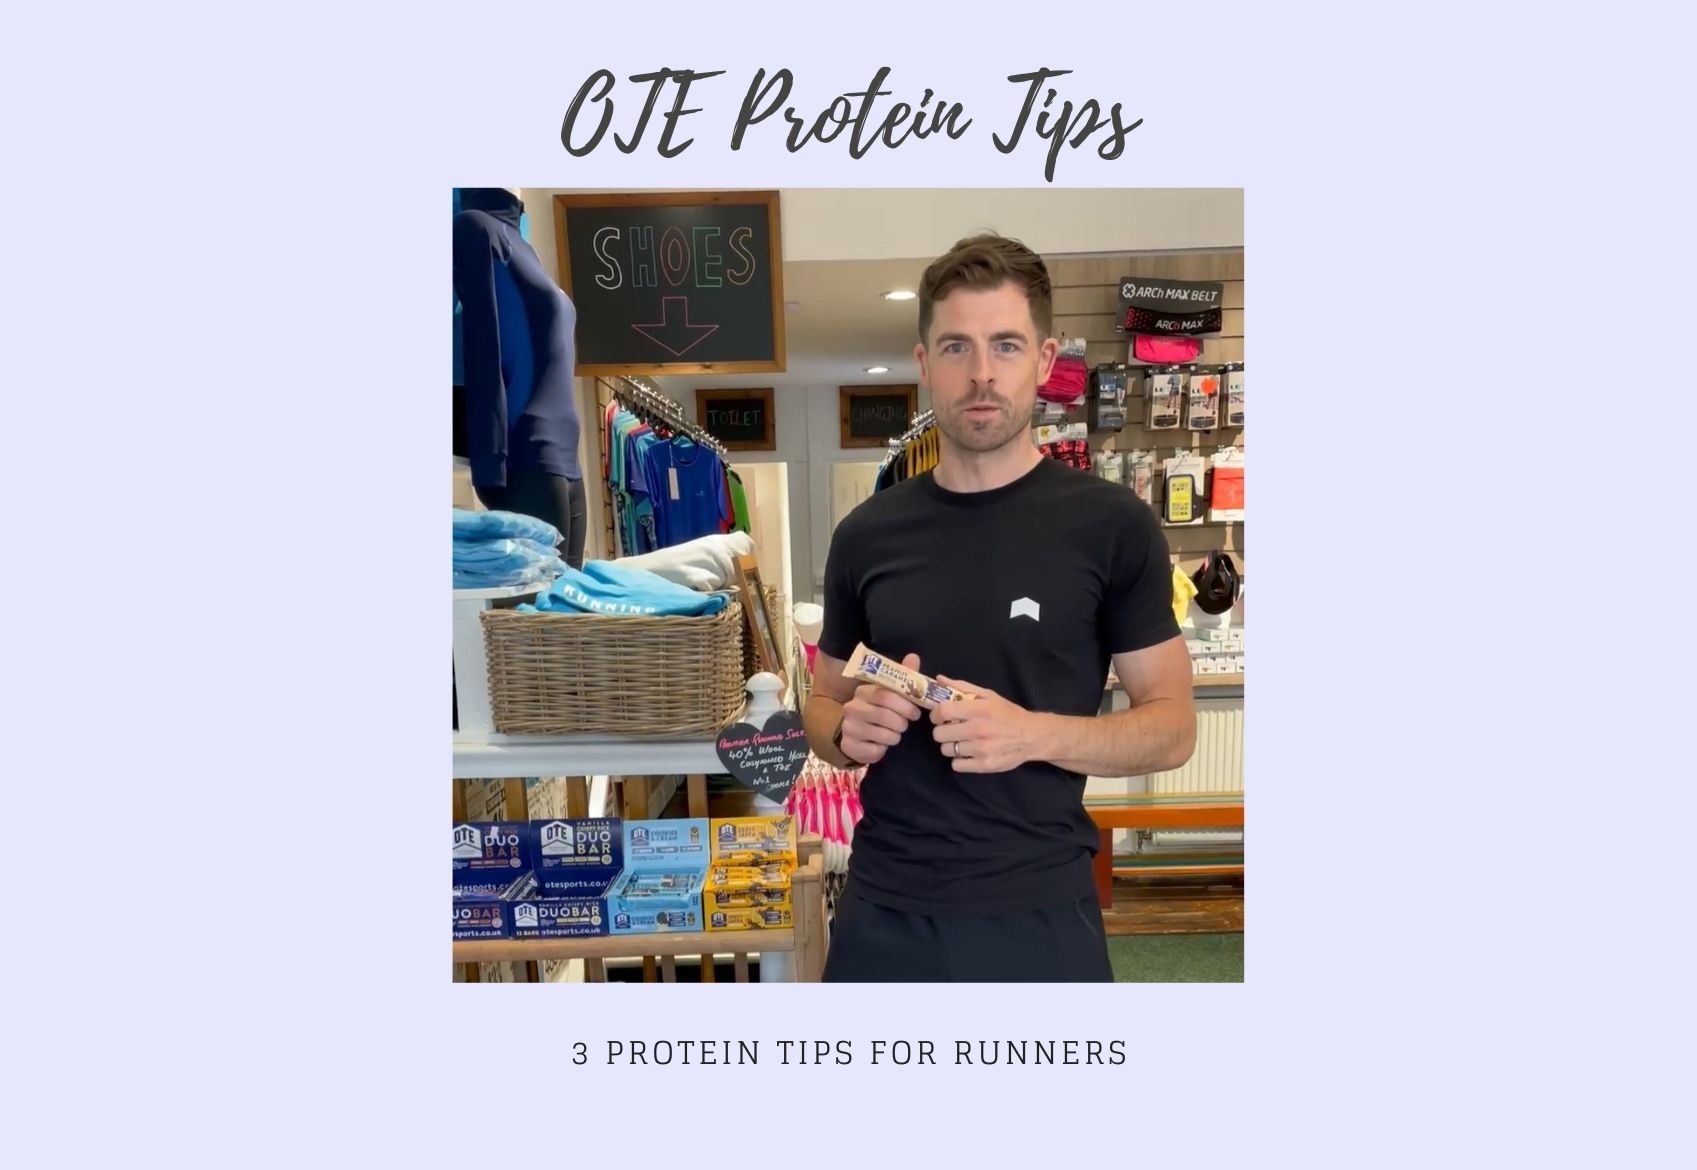 OTE Protein Tips for Runners